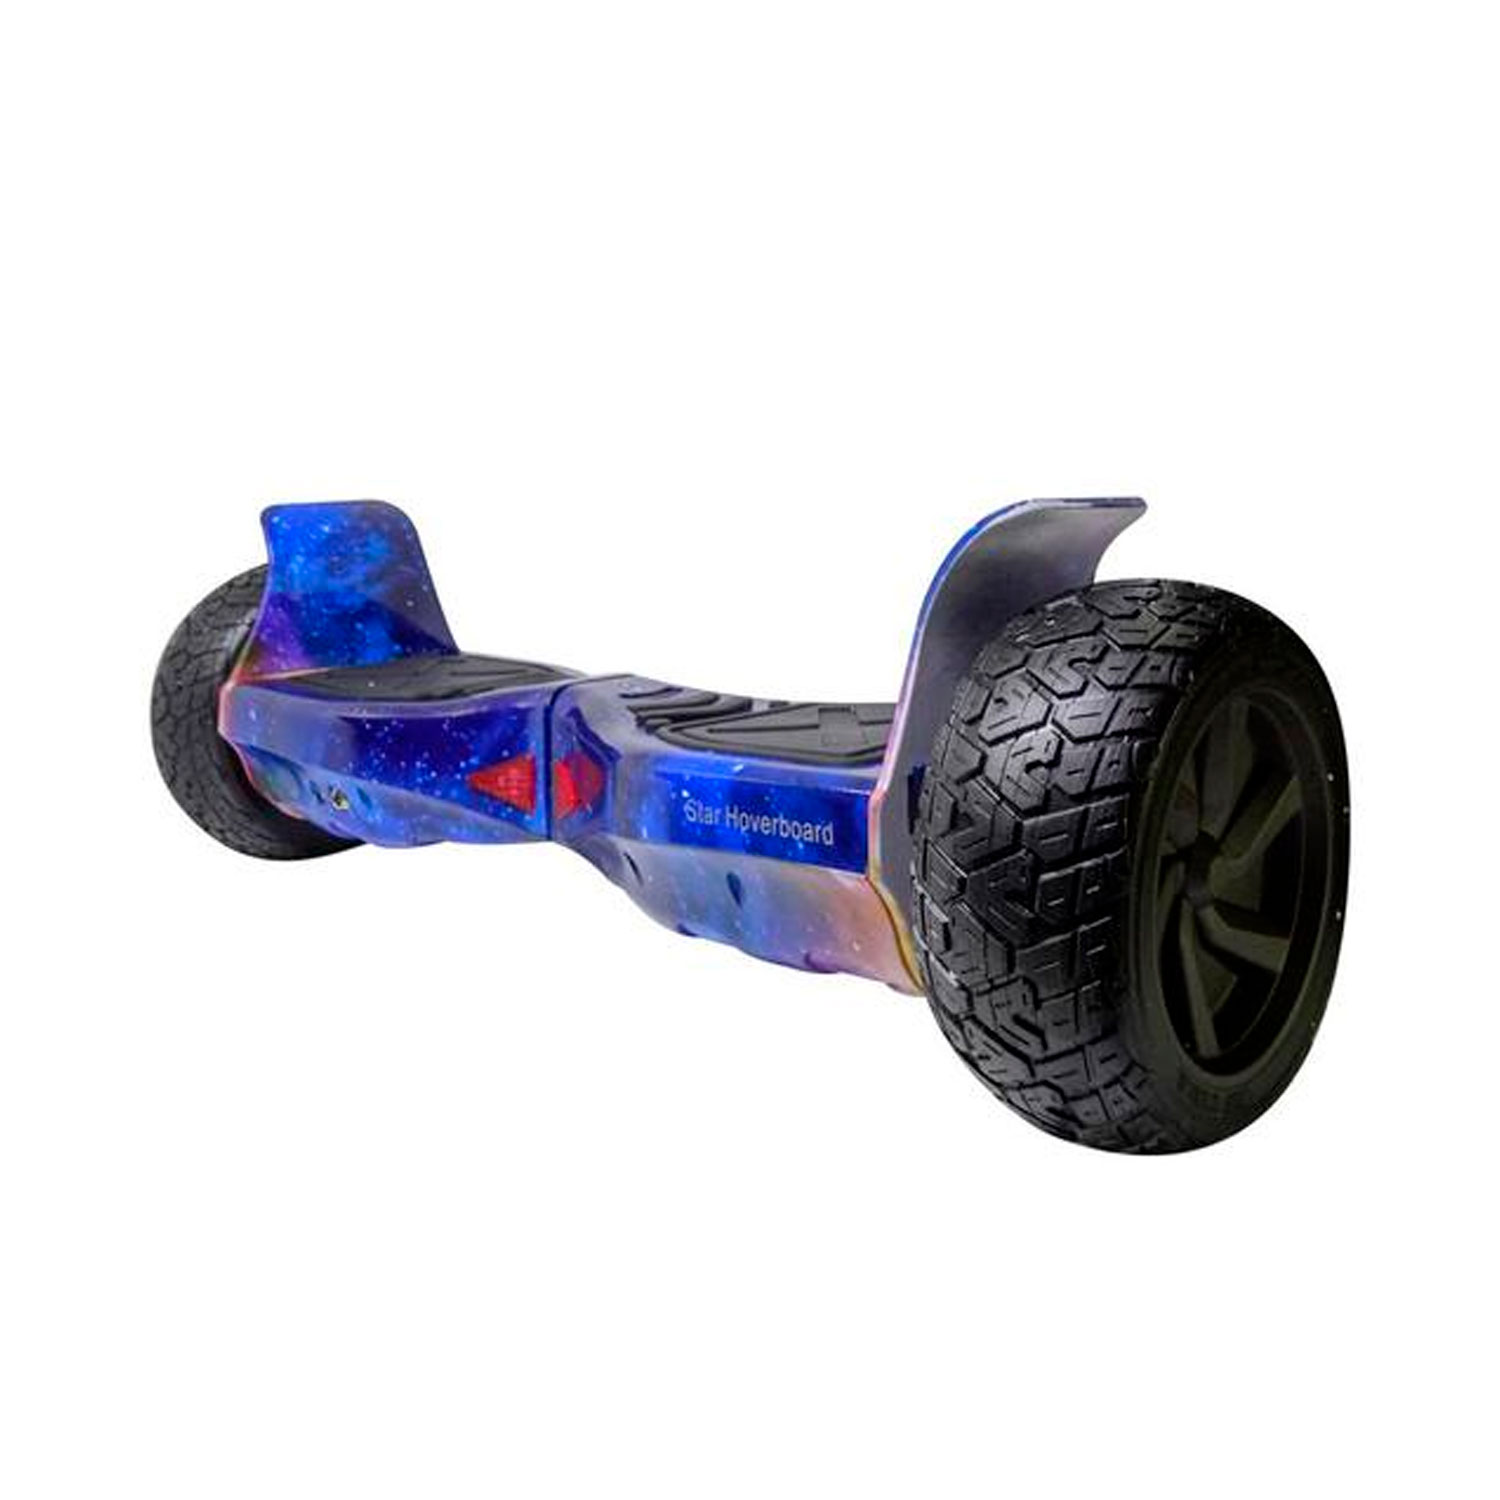 Scooter Elétrica Star Hoverboard 8.5"/ Off Road -Galáxia